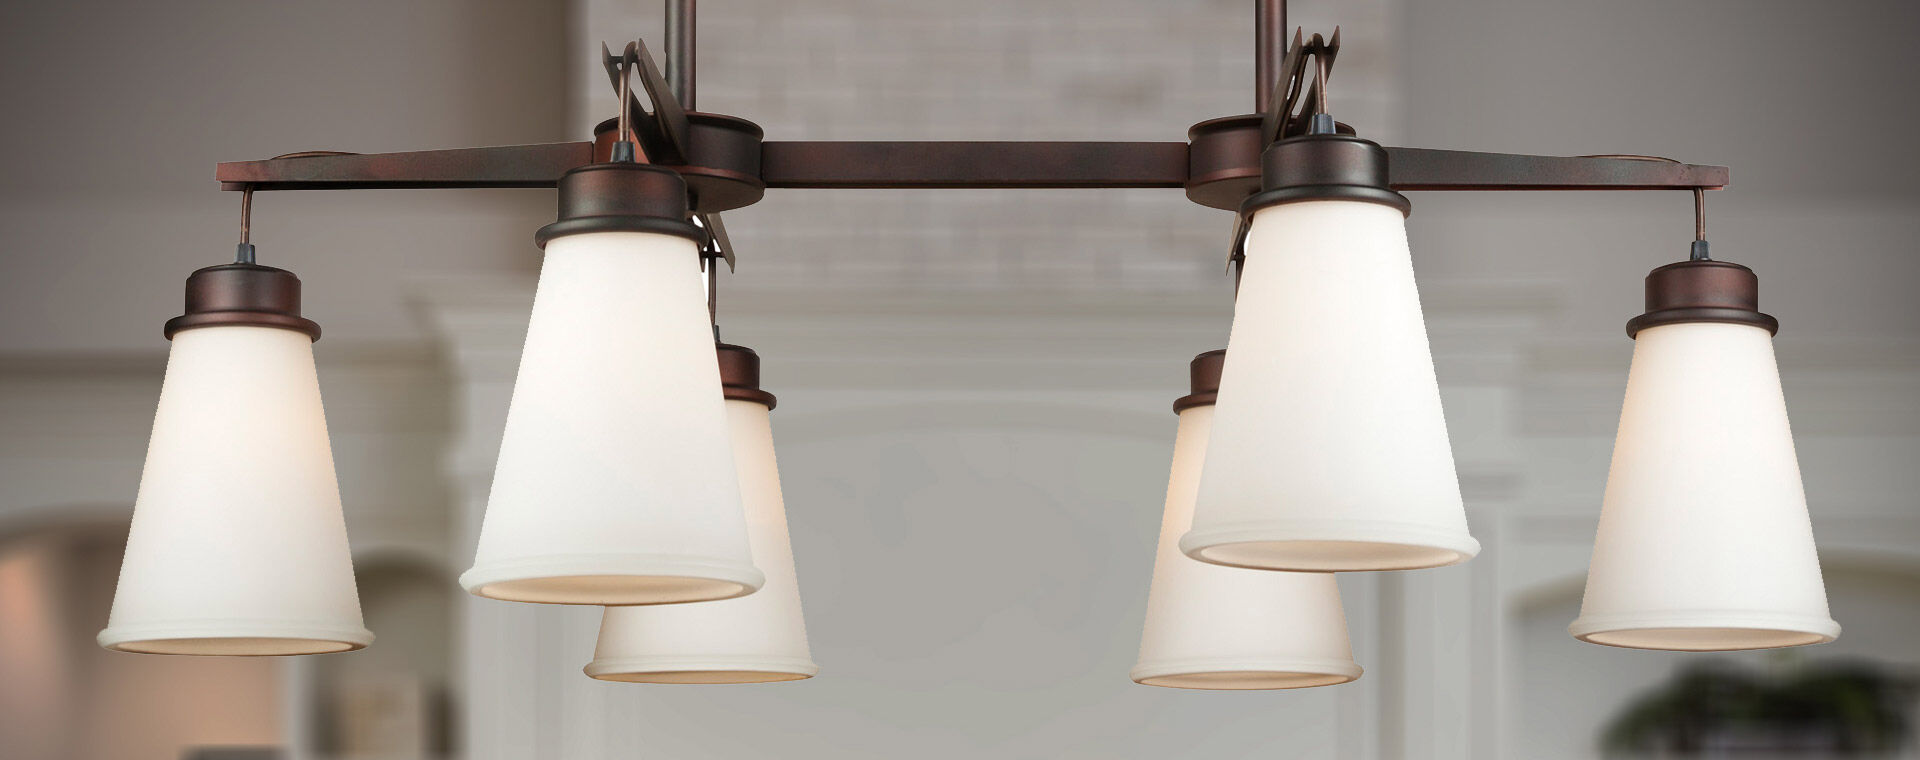 Forte Lighting | 20% Off Entire Line with code: PRESDAY24 | ends 3.3